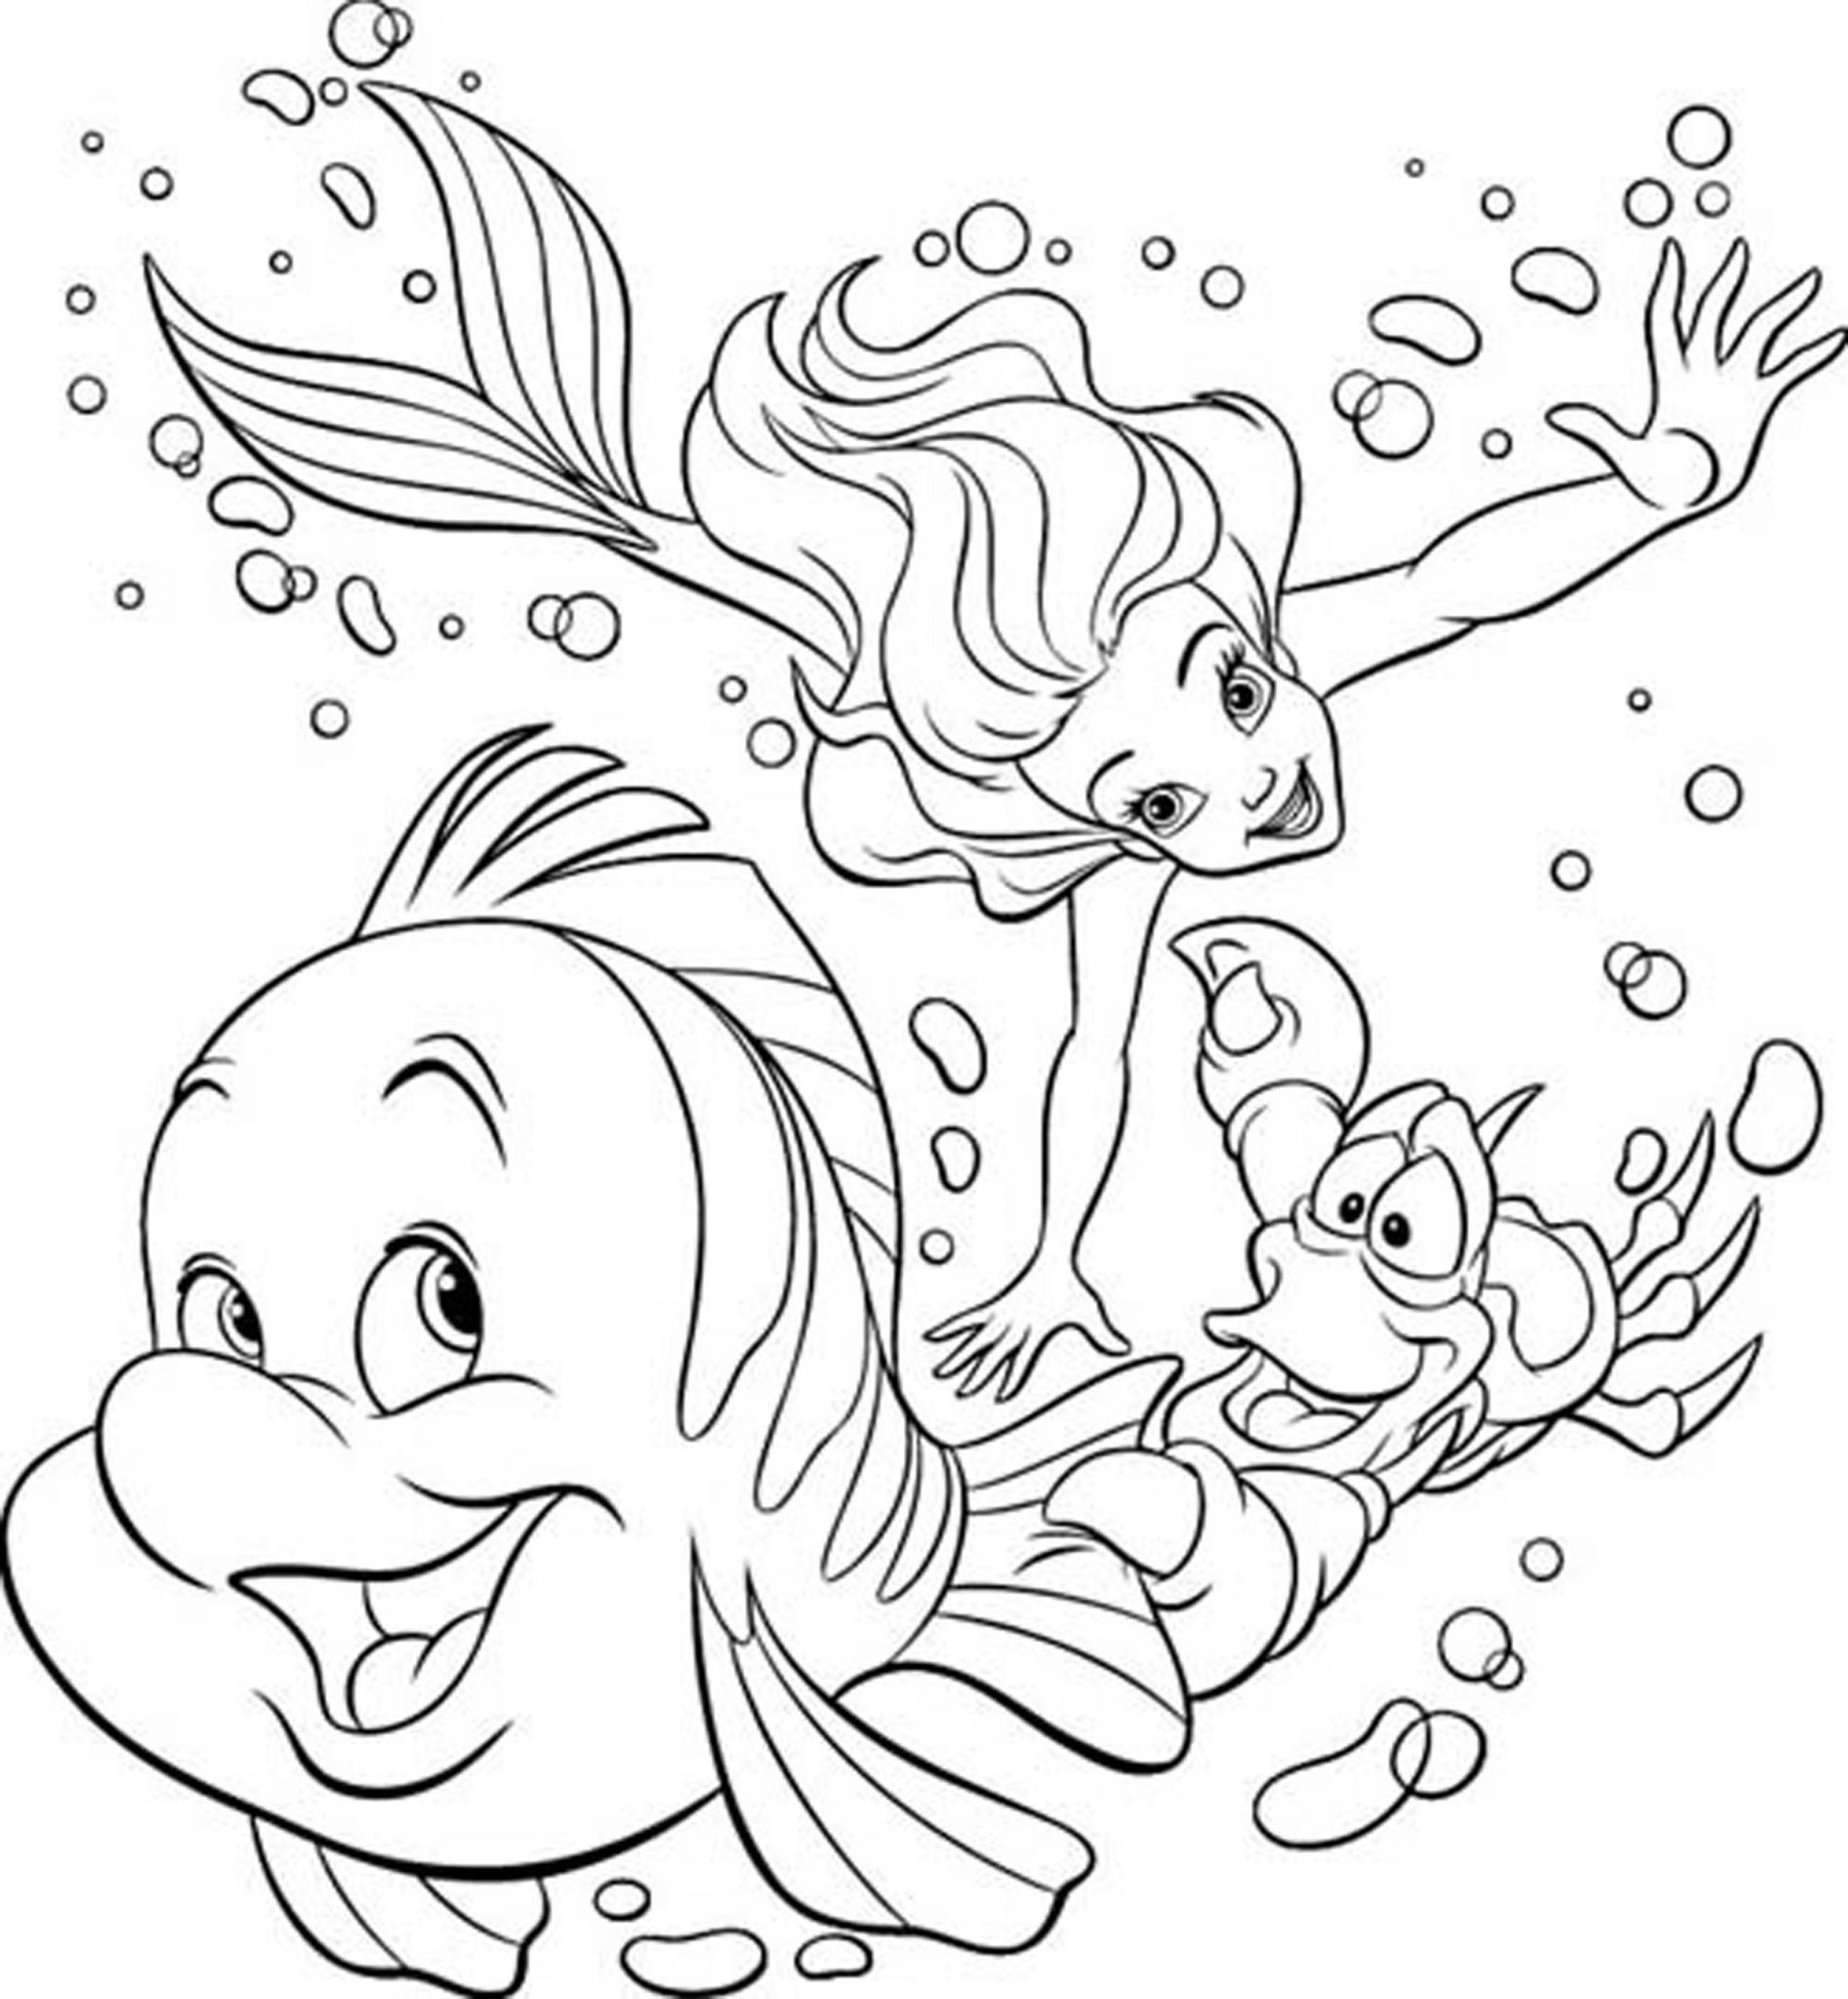 Print & Download Princess Coloring Pages, Support The Child’s Activity